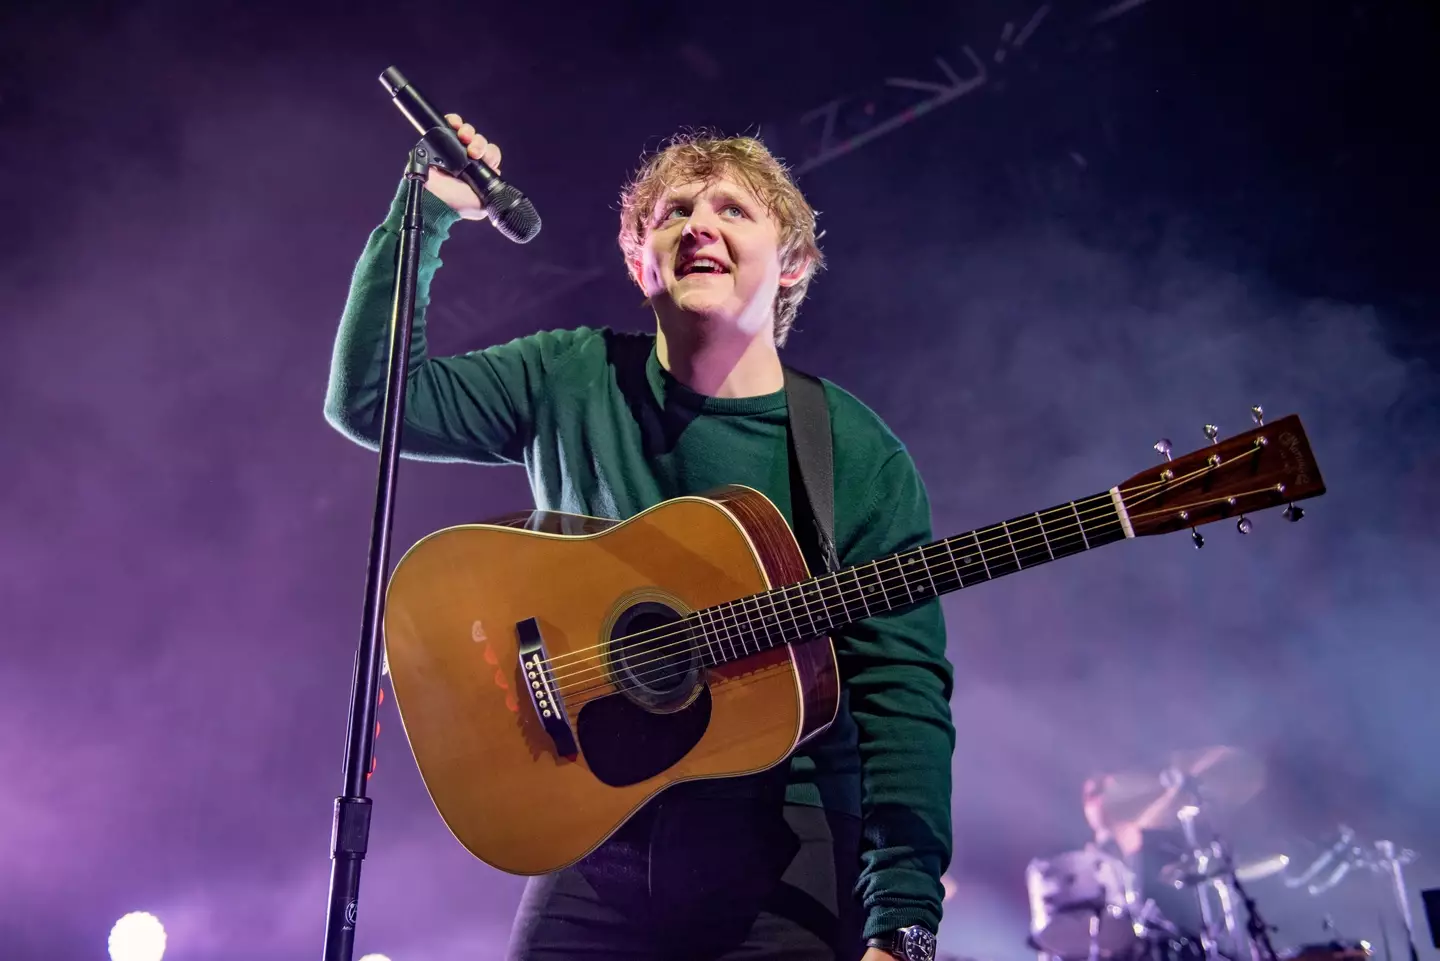 Lewis Capaldi stopped his concert in Cardiff to help someone propose.